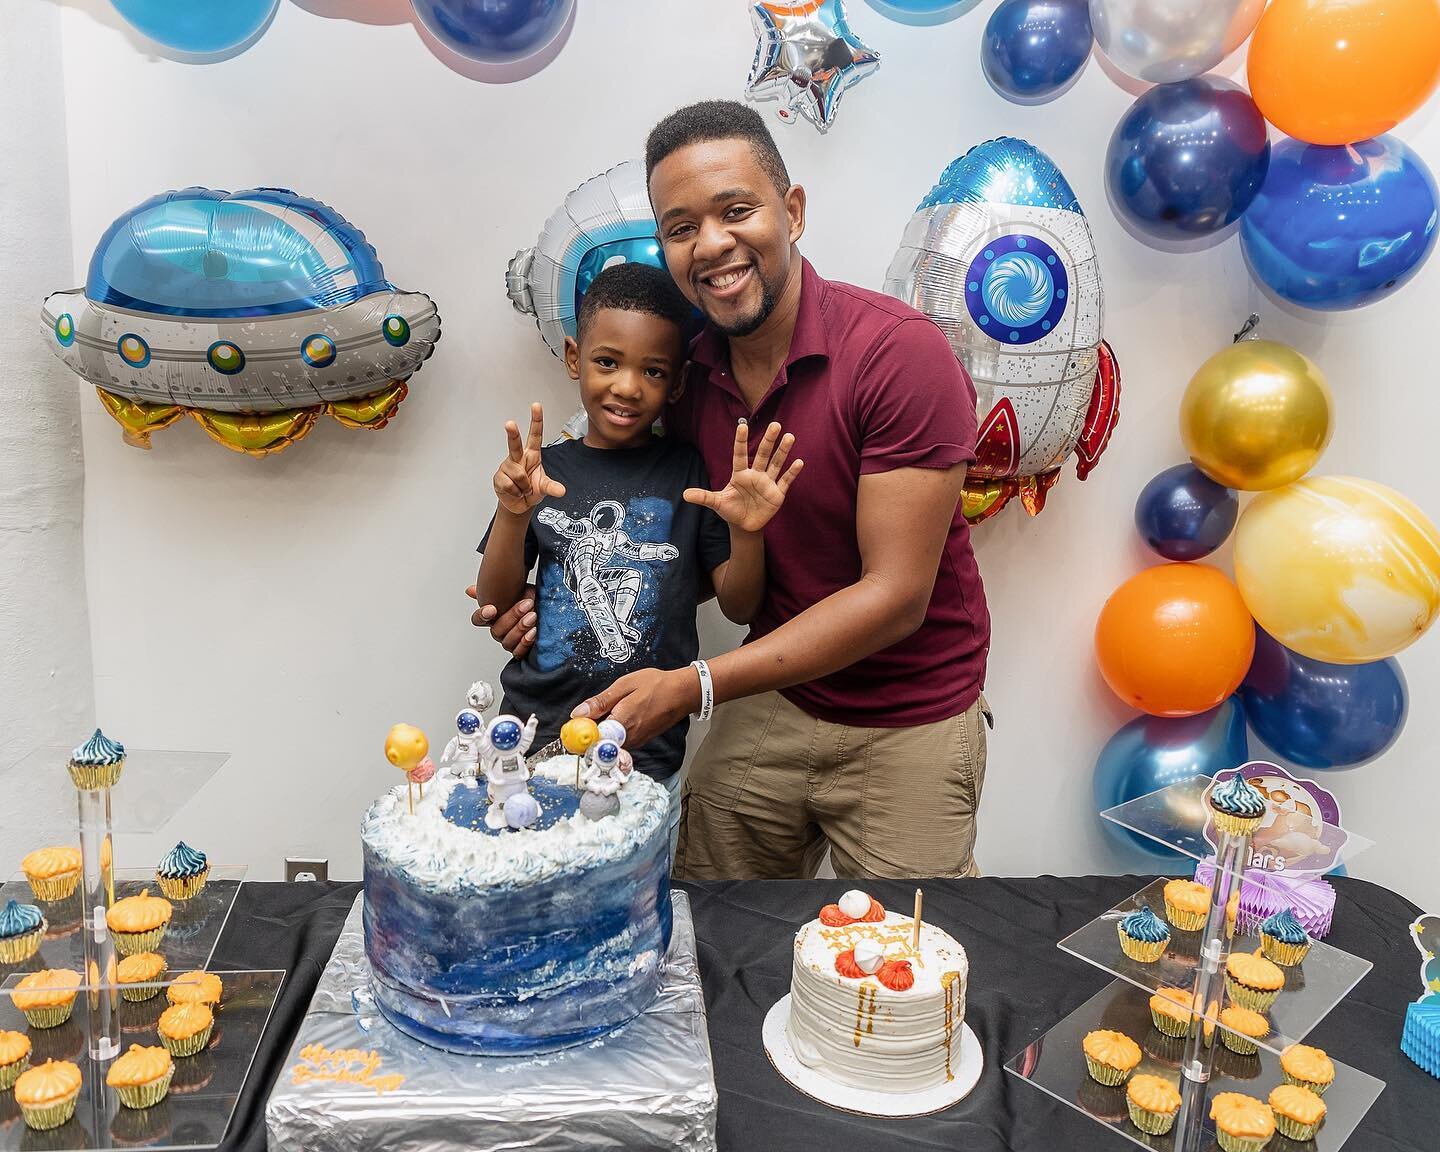 I&rsquo;m obsessed with numbers and dates and making sure my children feel special for their birthday. It&rsquo;s one of the few obsessive compulsive behaviors that I haven&rsquo;t outgrown yet. So having to sit out on Jaden&rsquo;s birthday party to